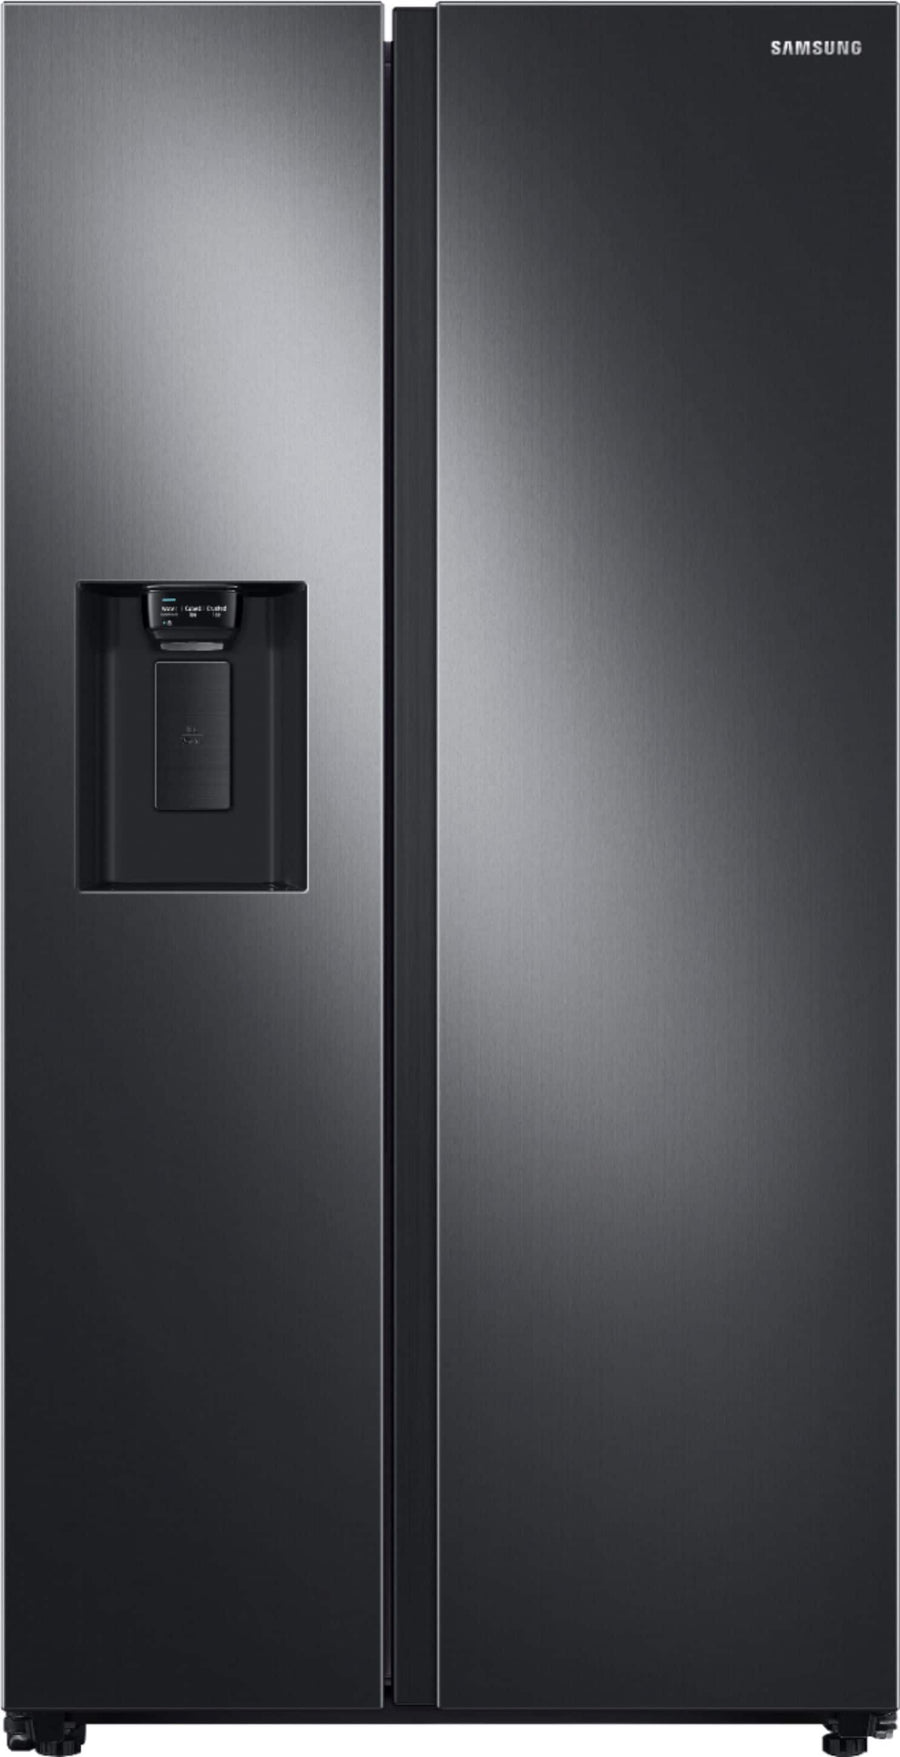 Samsung - 22 Cu. Ft. Side-by-Side Counter-Depth Refrigerator - Black stainless steel_0